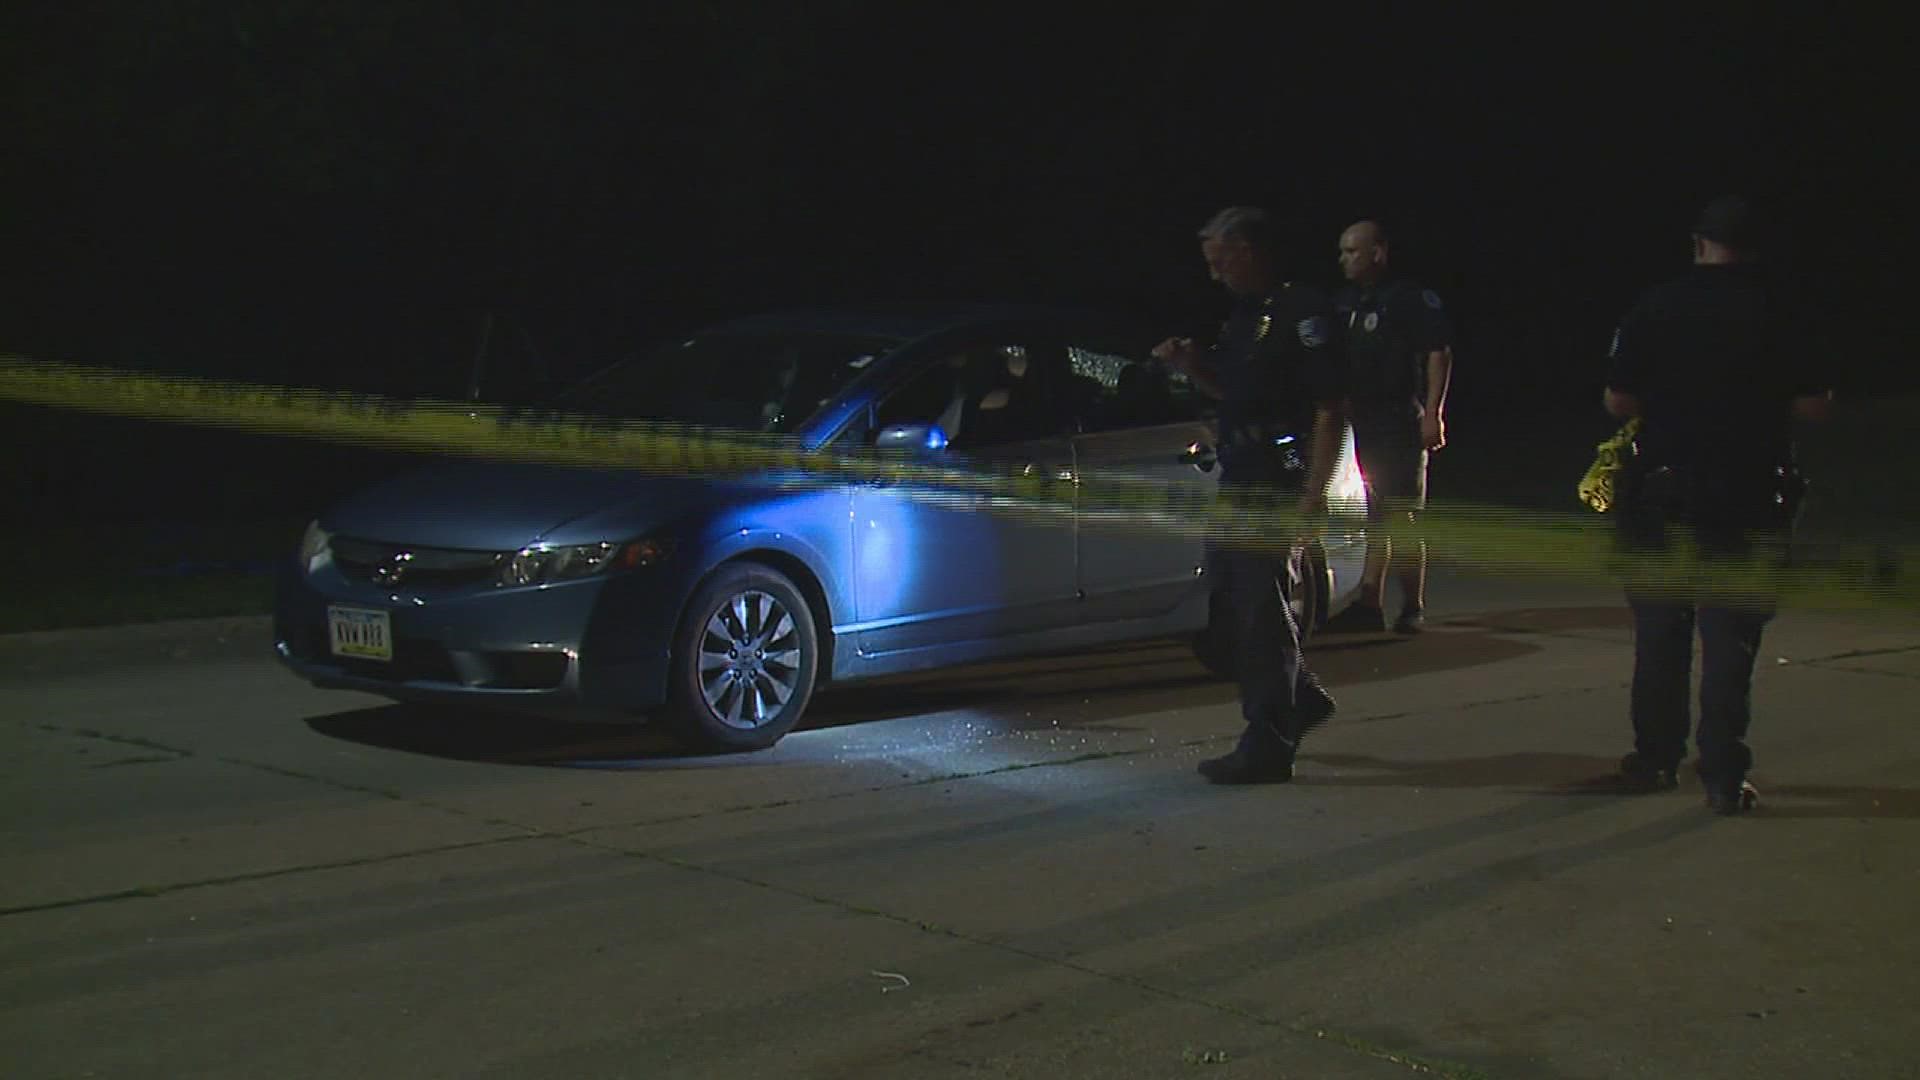 Davenport Police say the shooting happened after a fight broke out between two vehicles